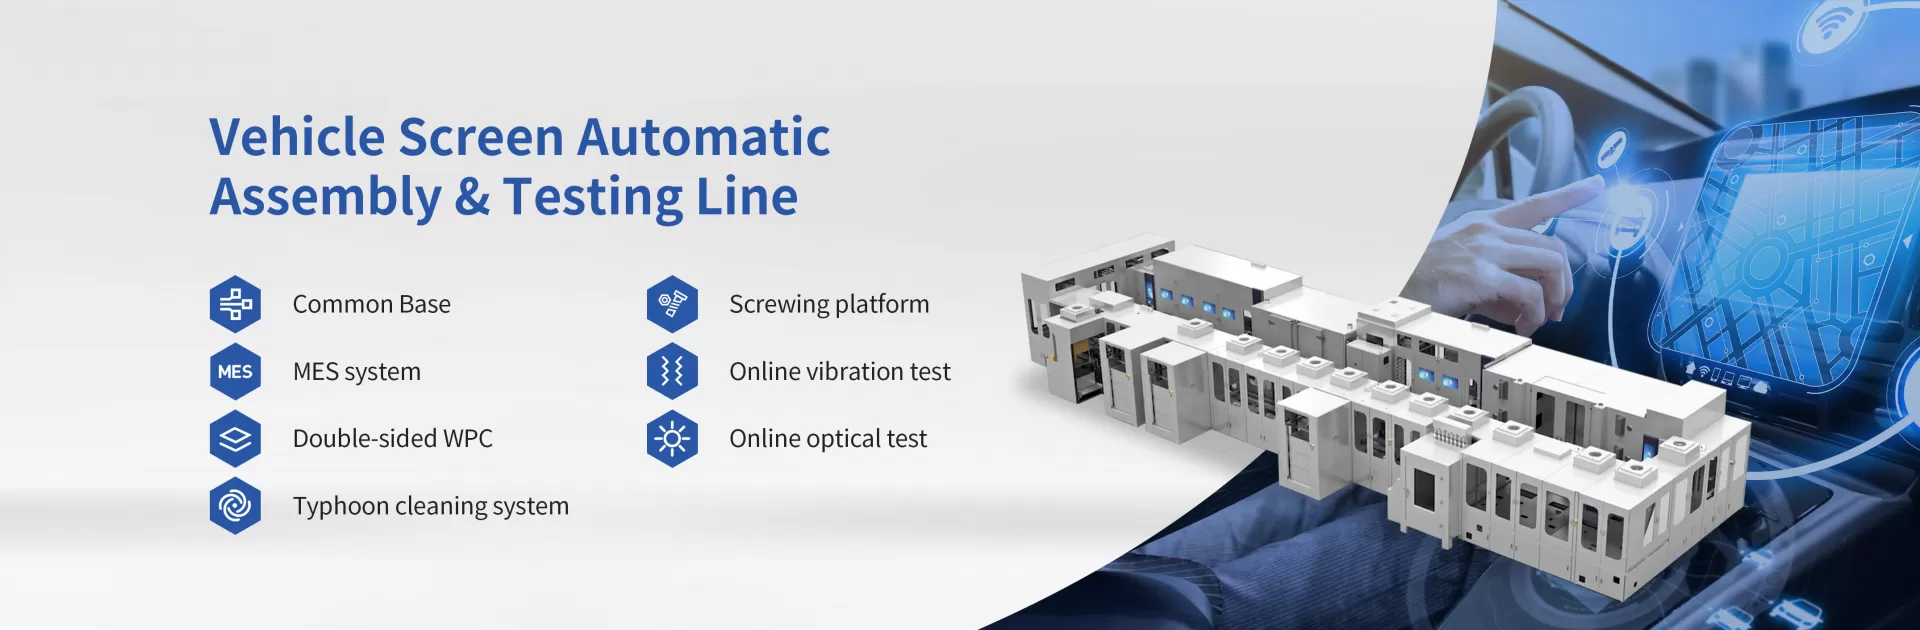 Vehicle Screen Automatic Assembly&Testing Line